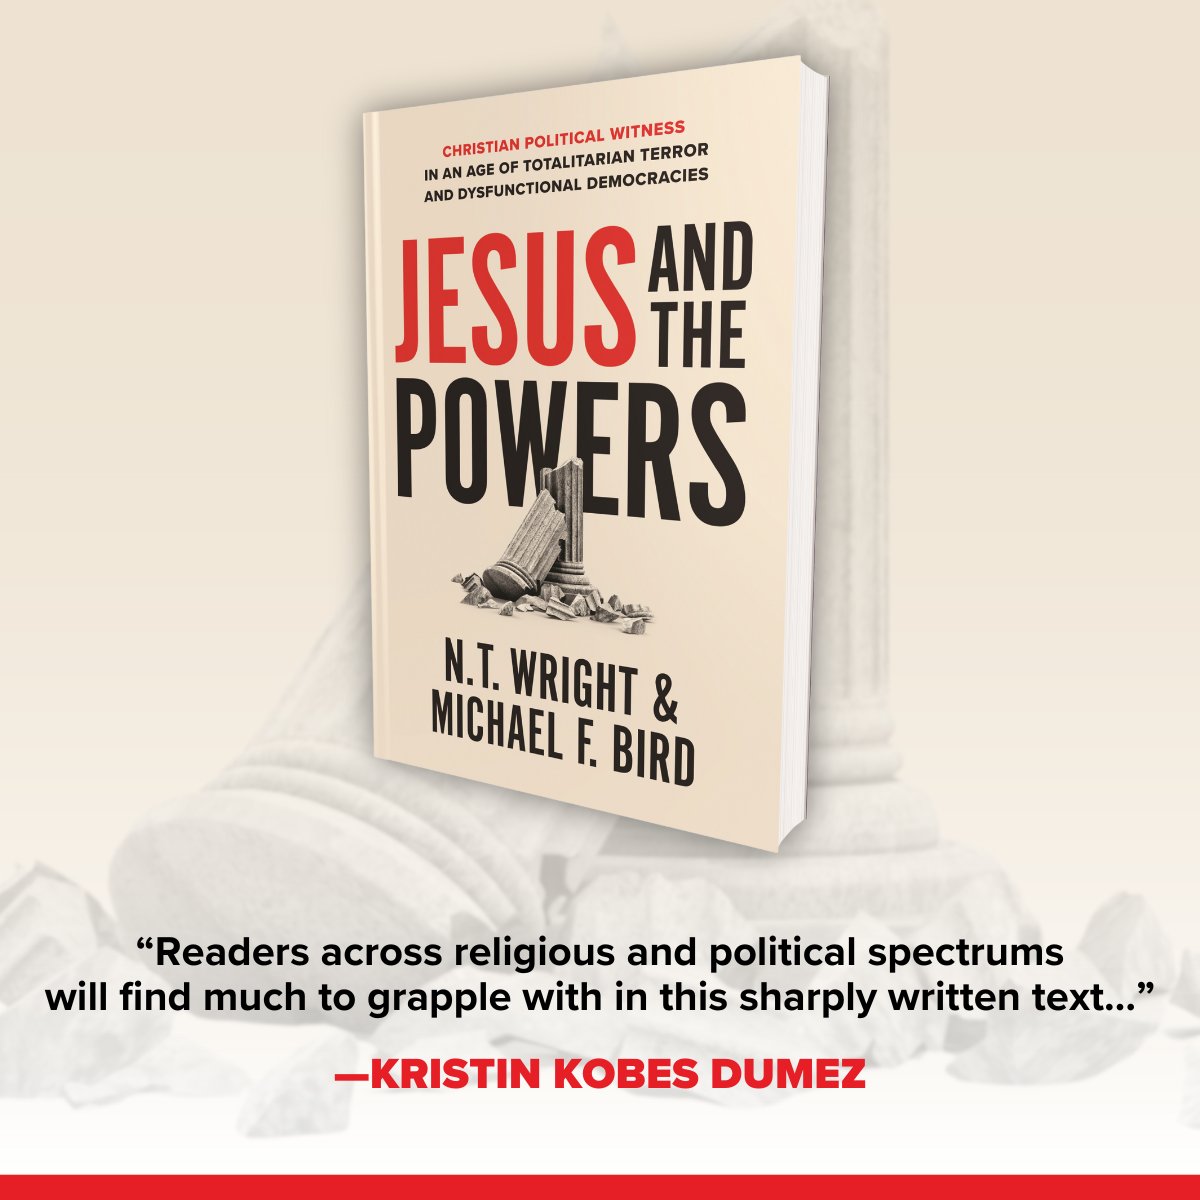 I'm very grateful to Kristin Kobes Du Mez for her endorsement of Jesus and the Powers, which I've co-authored with Michael Bird. I encourage you to get a copy of the book today. @kkdumez